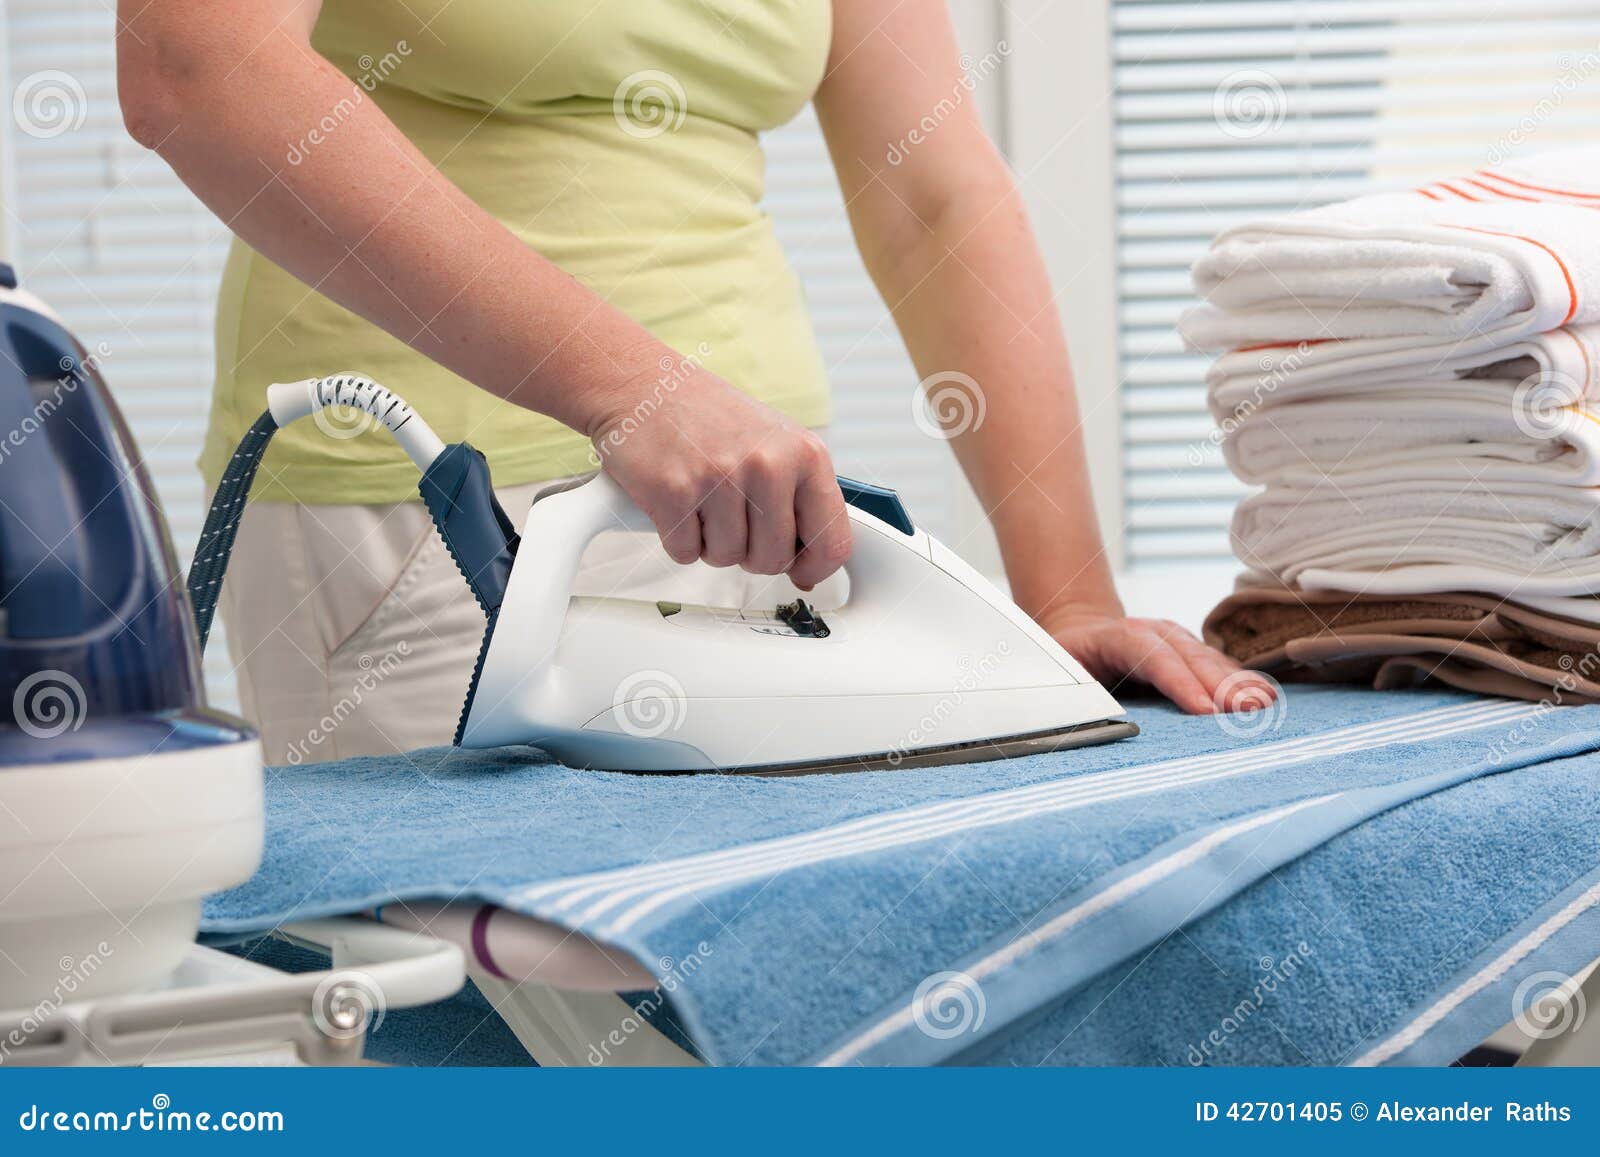 Ironing clothes with steam фото 4